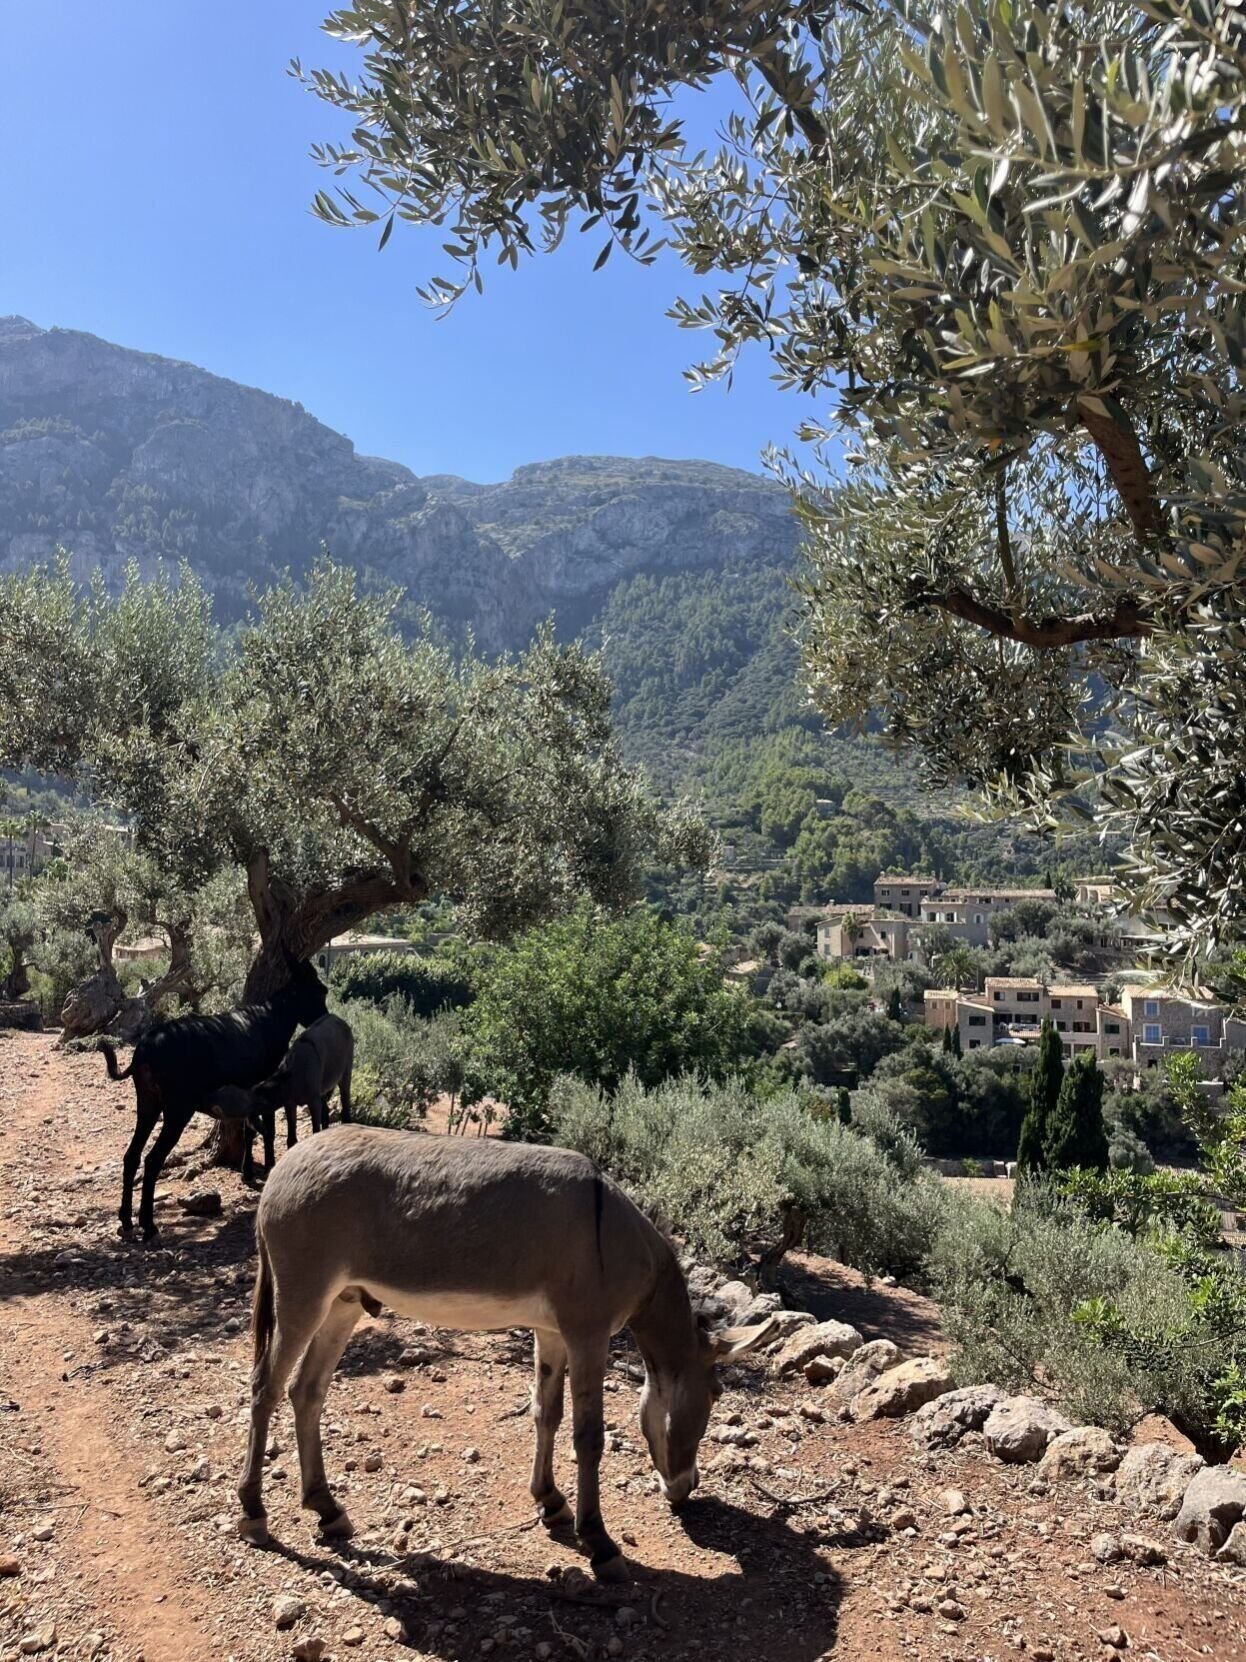 Mallorca travel guide: tranquility amid the olive groves